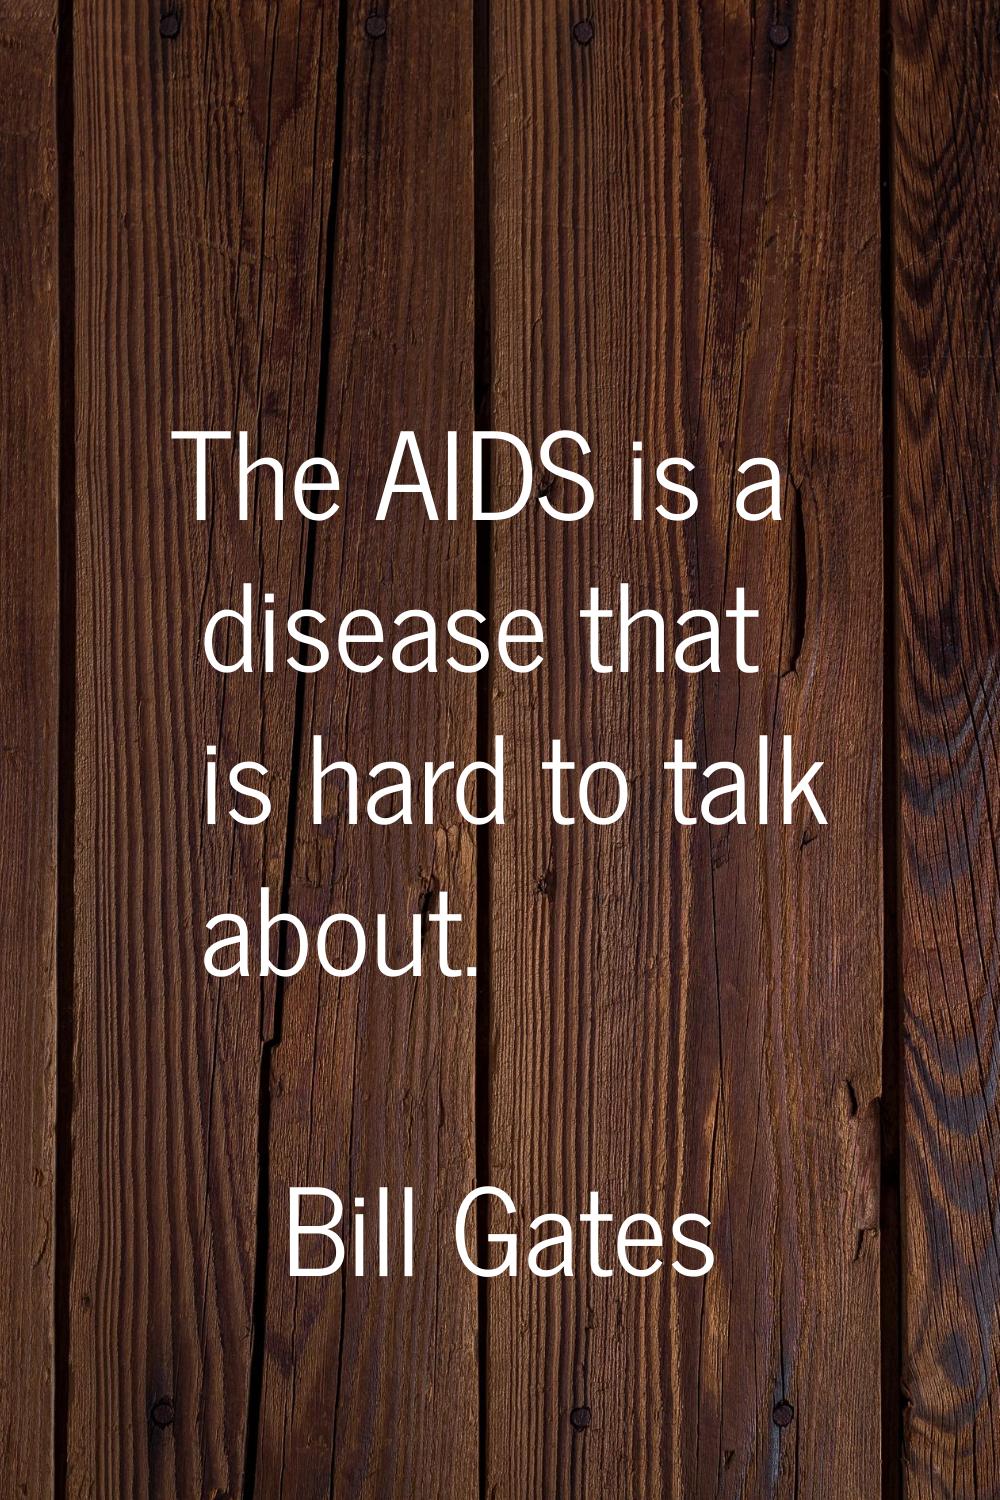 The AIDS is a disease that is hard to talk about.